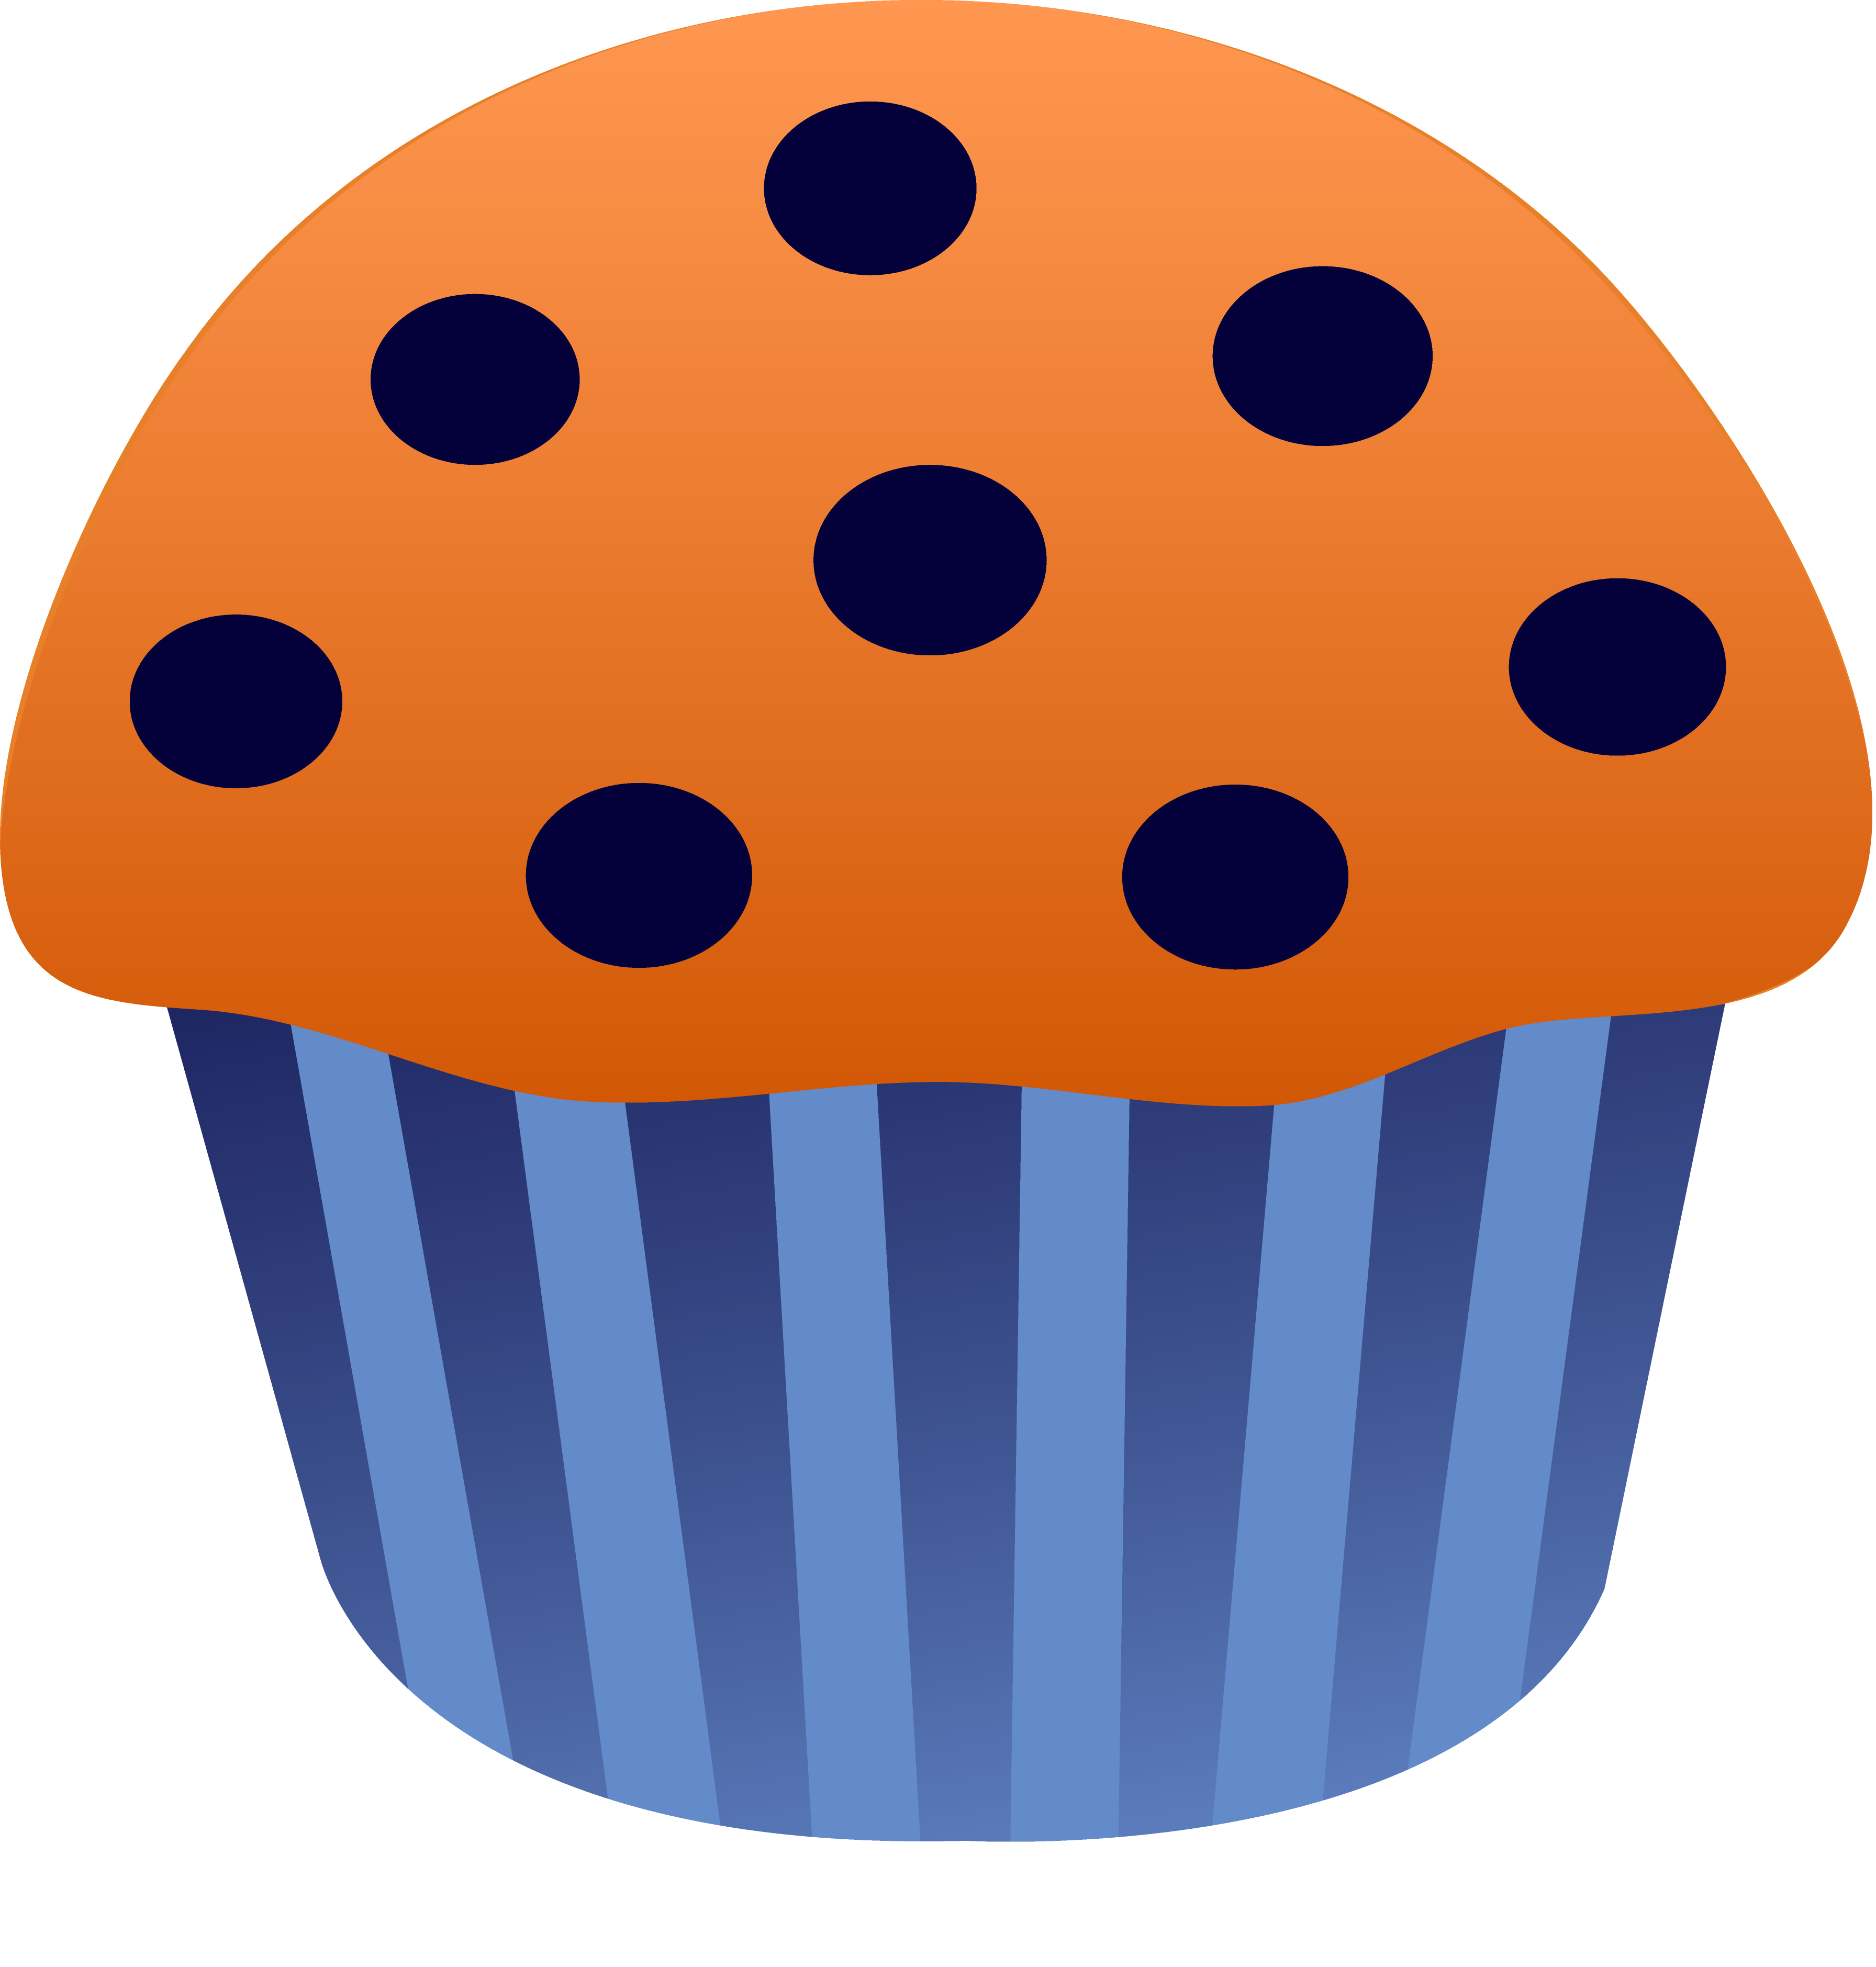 Blueberry muffin vector free. Clipart food simple